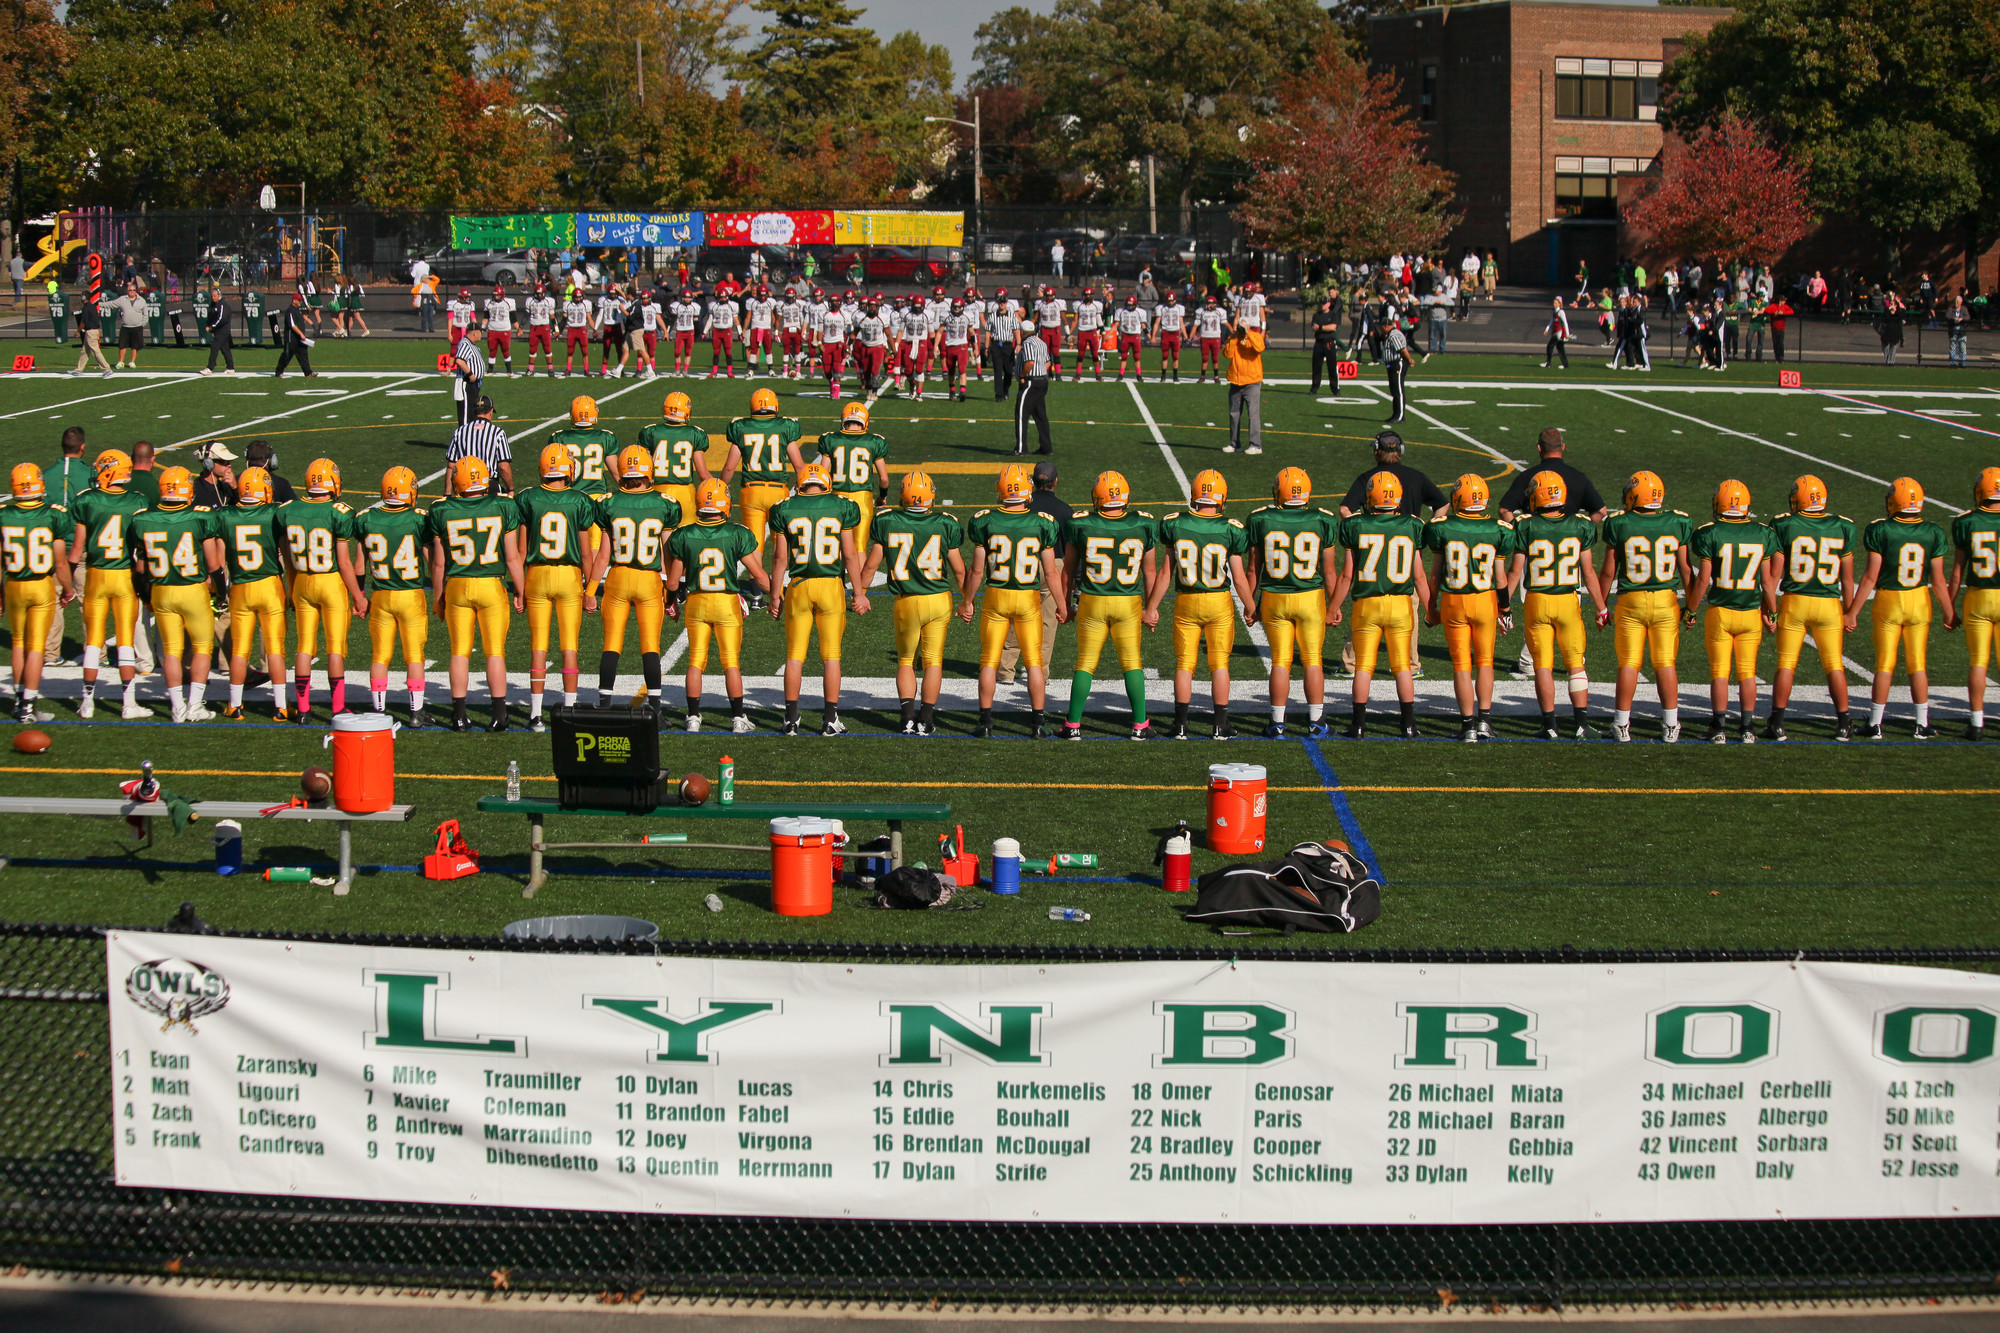 Lynbrook and Glen Cove line up for the coin toss before the start of the game.